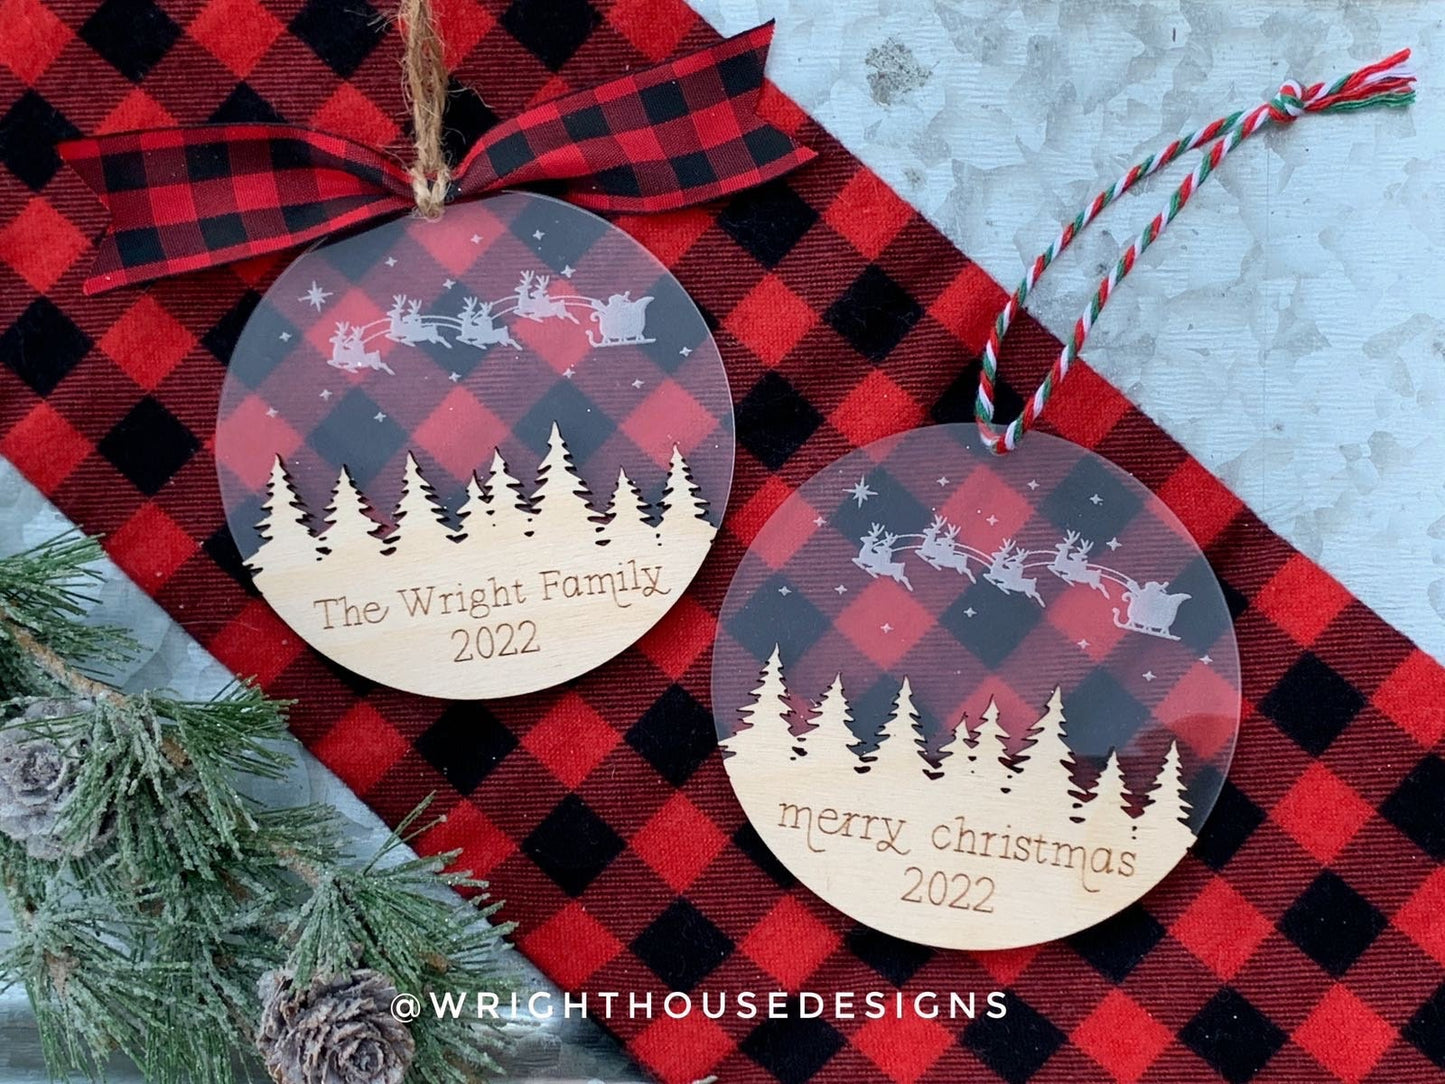 Santa's Sleigh Layered Christmas Ornament Set - Engraved Personalized Christmas Ornaments - Cut File For Glowforge Lasers - Digital SVG File